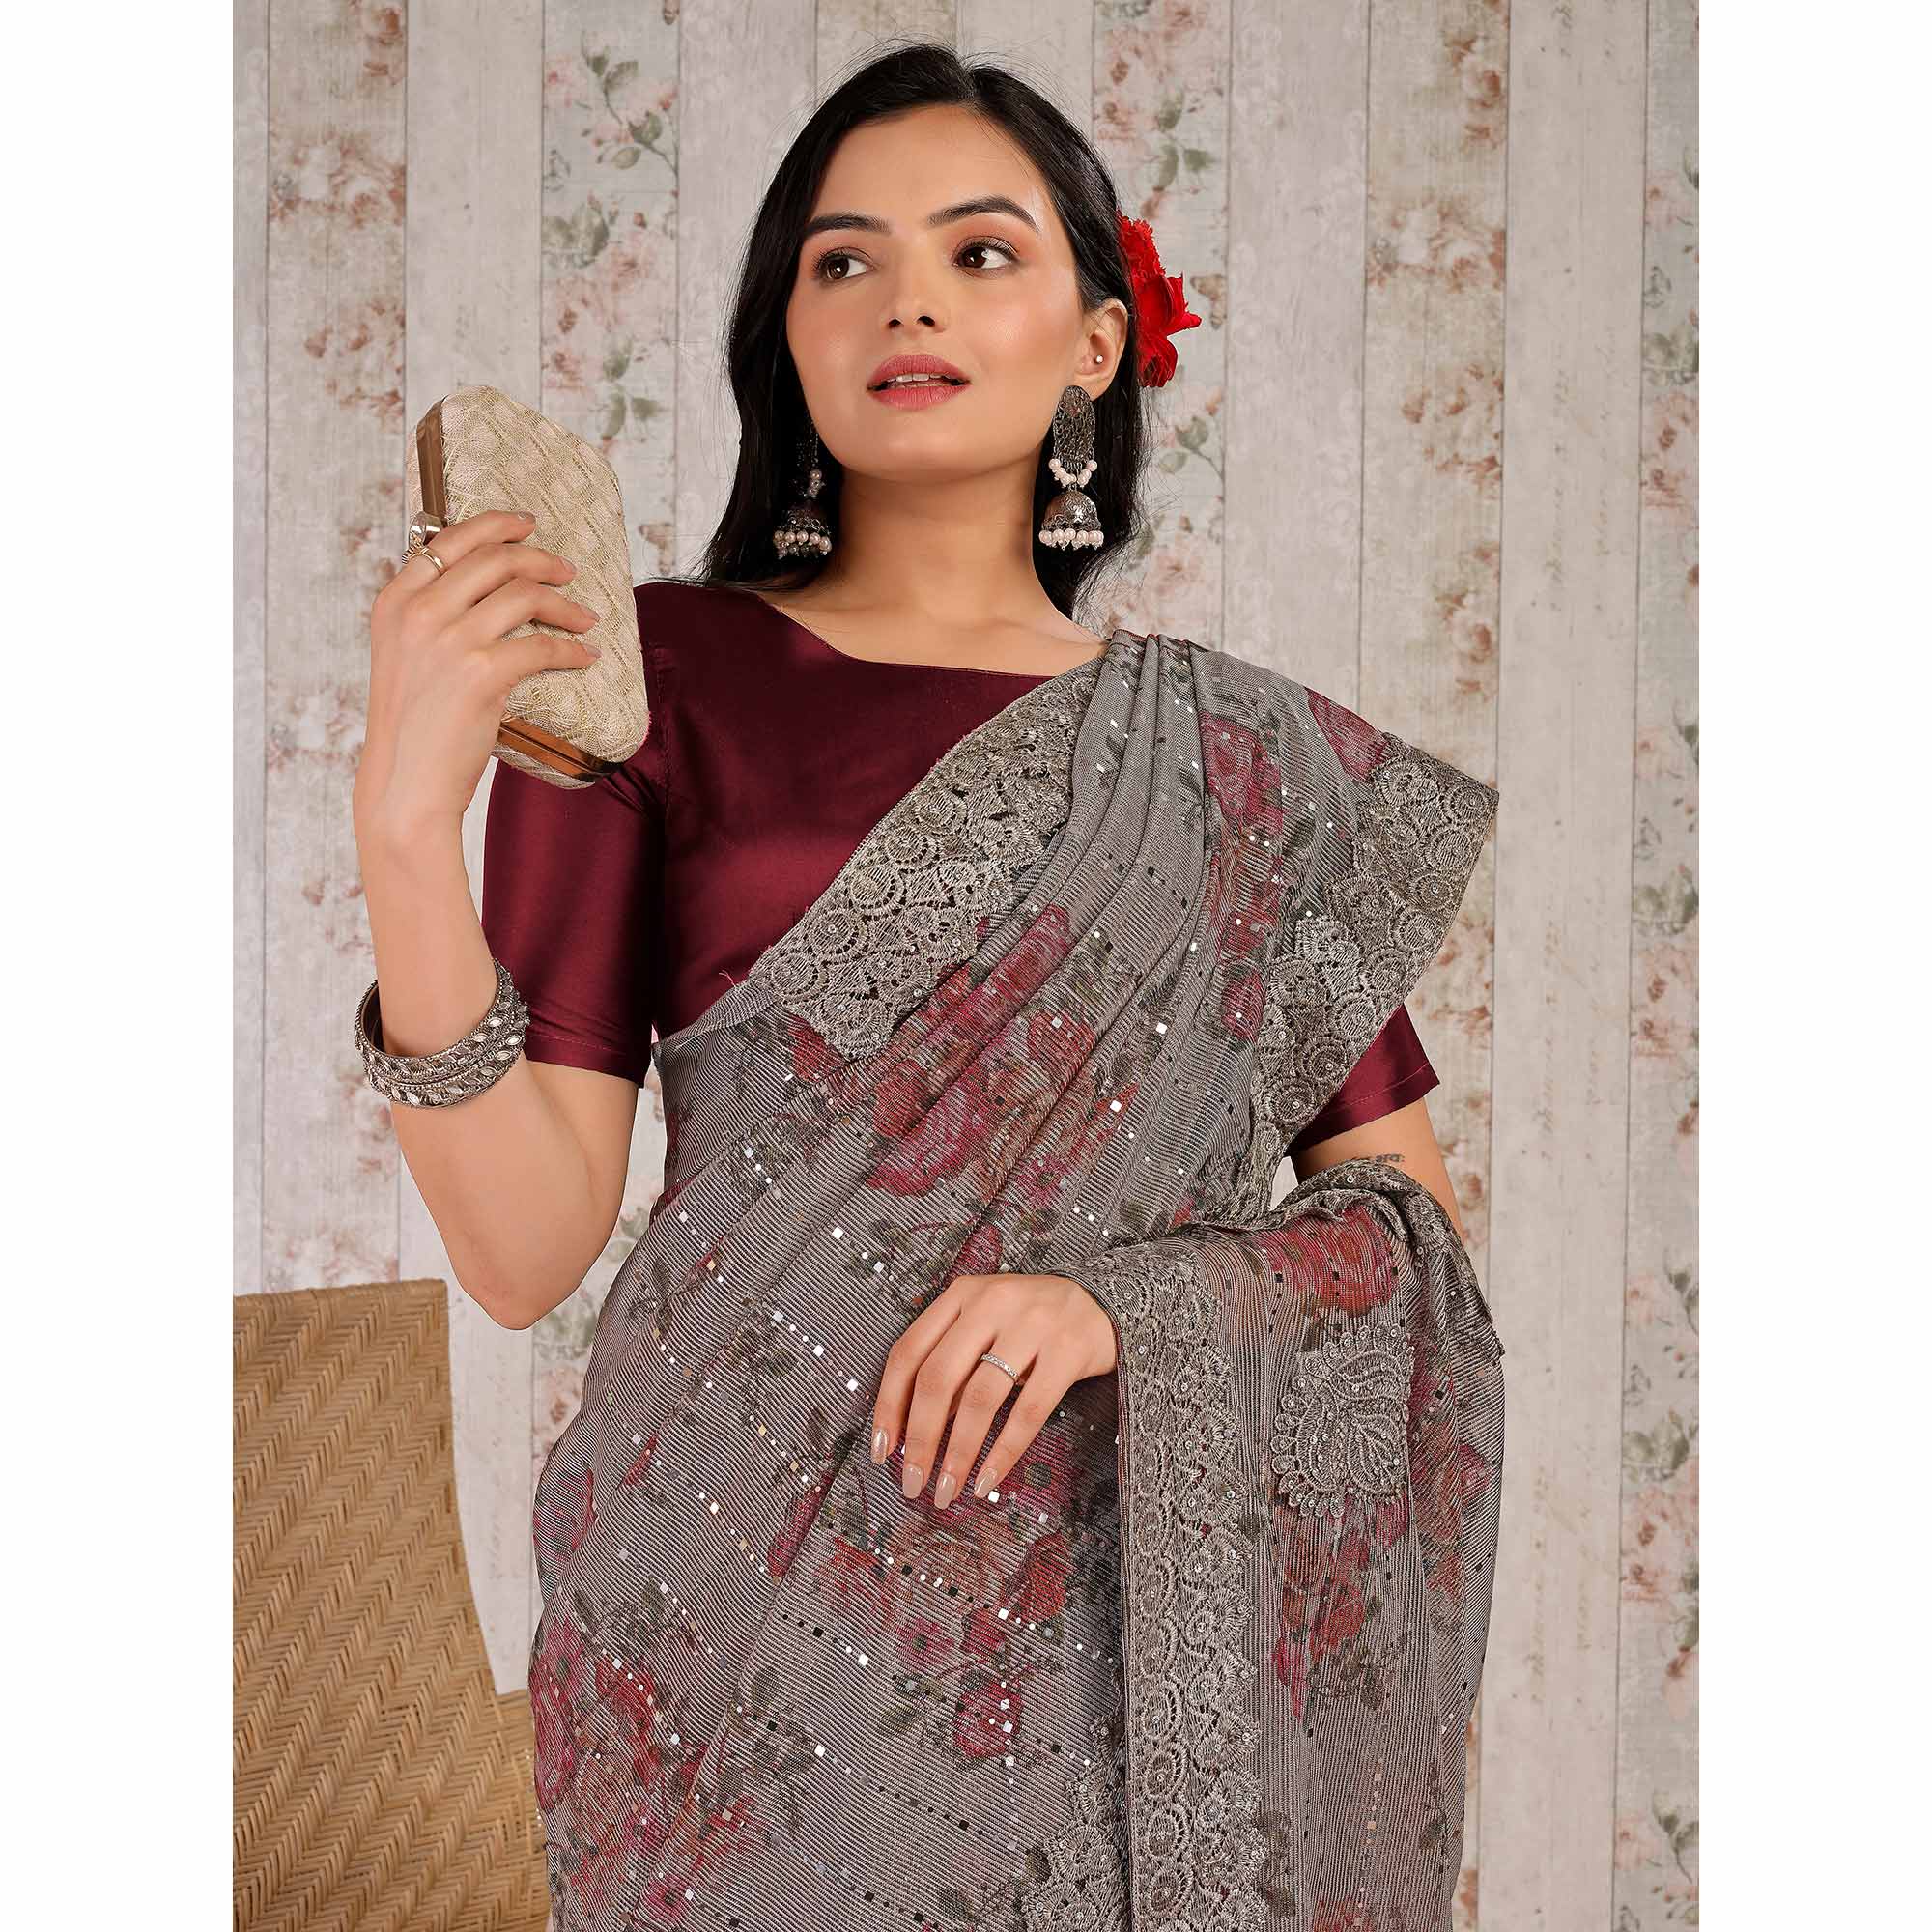 Grey Floral Digital Printed Lycra Saree With Embroidered Border